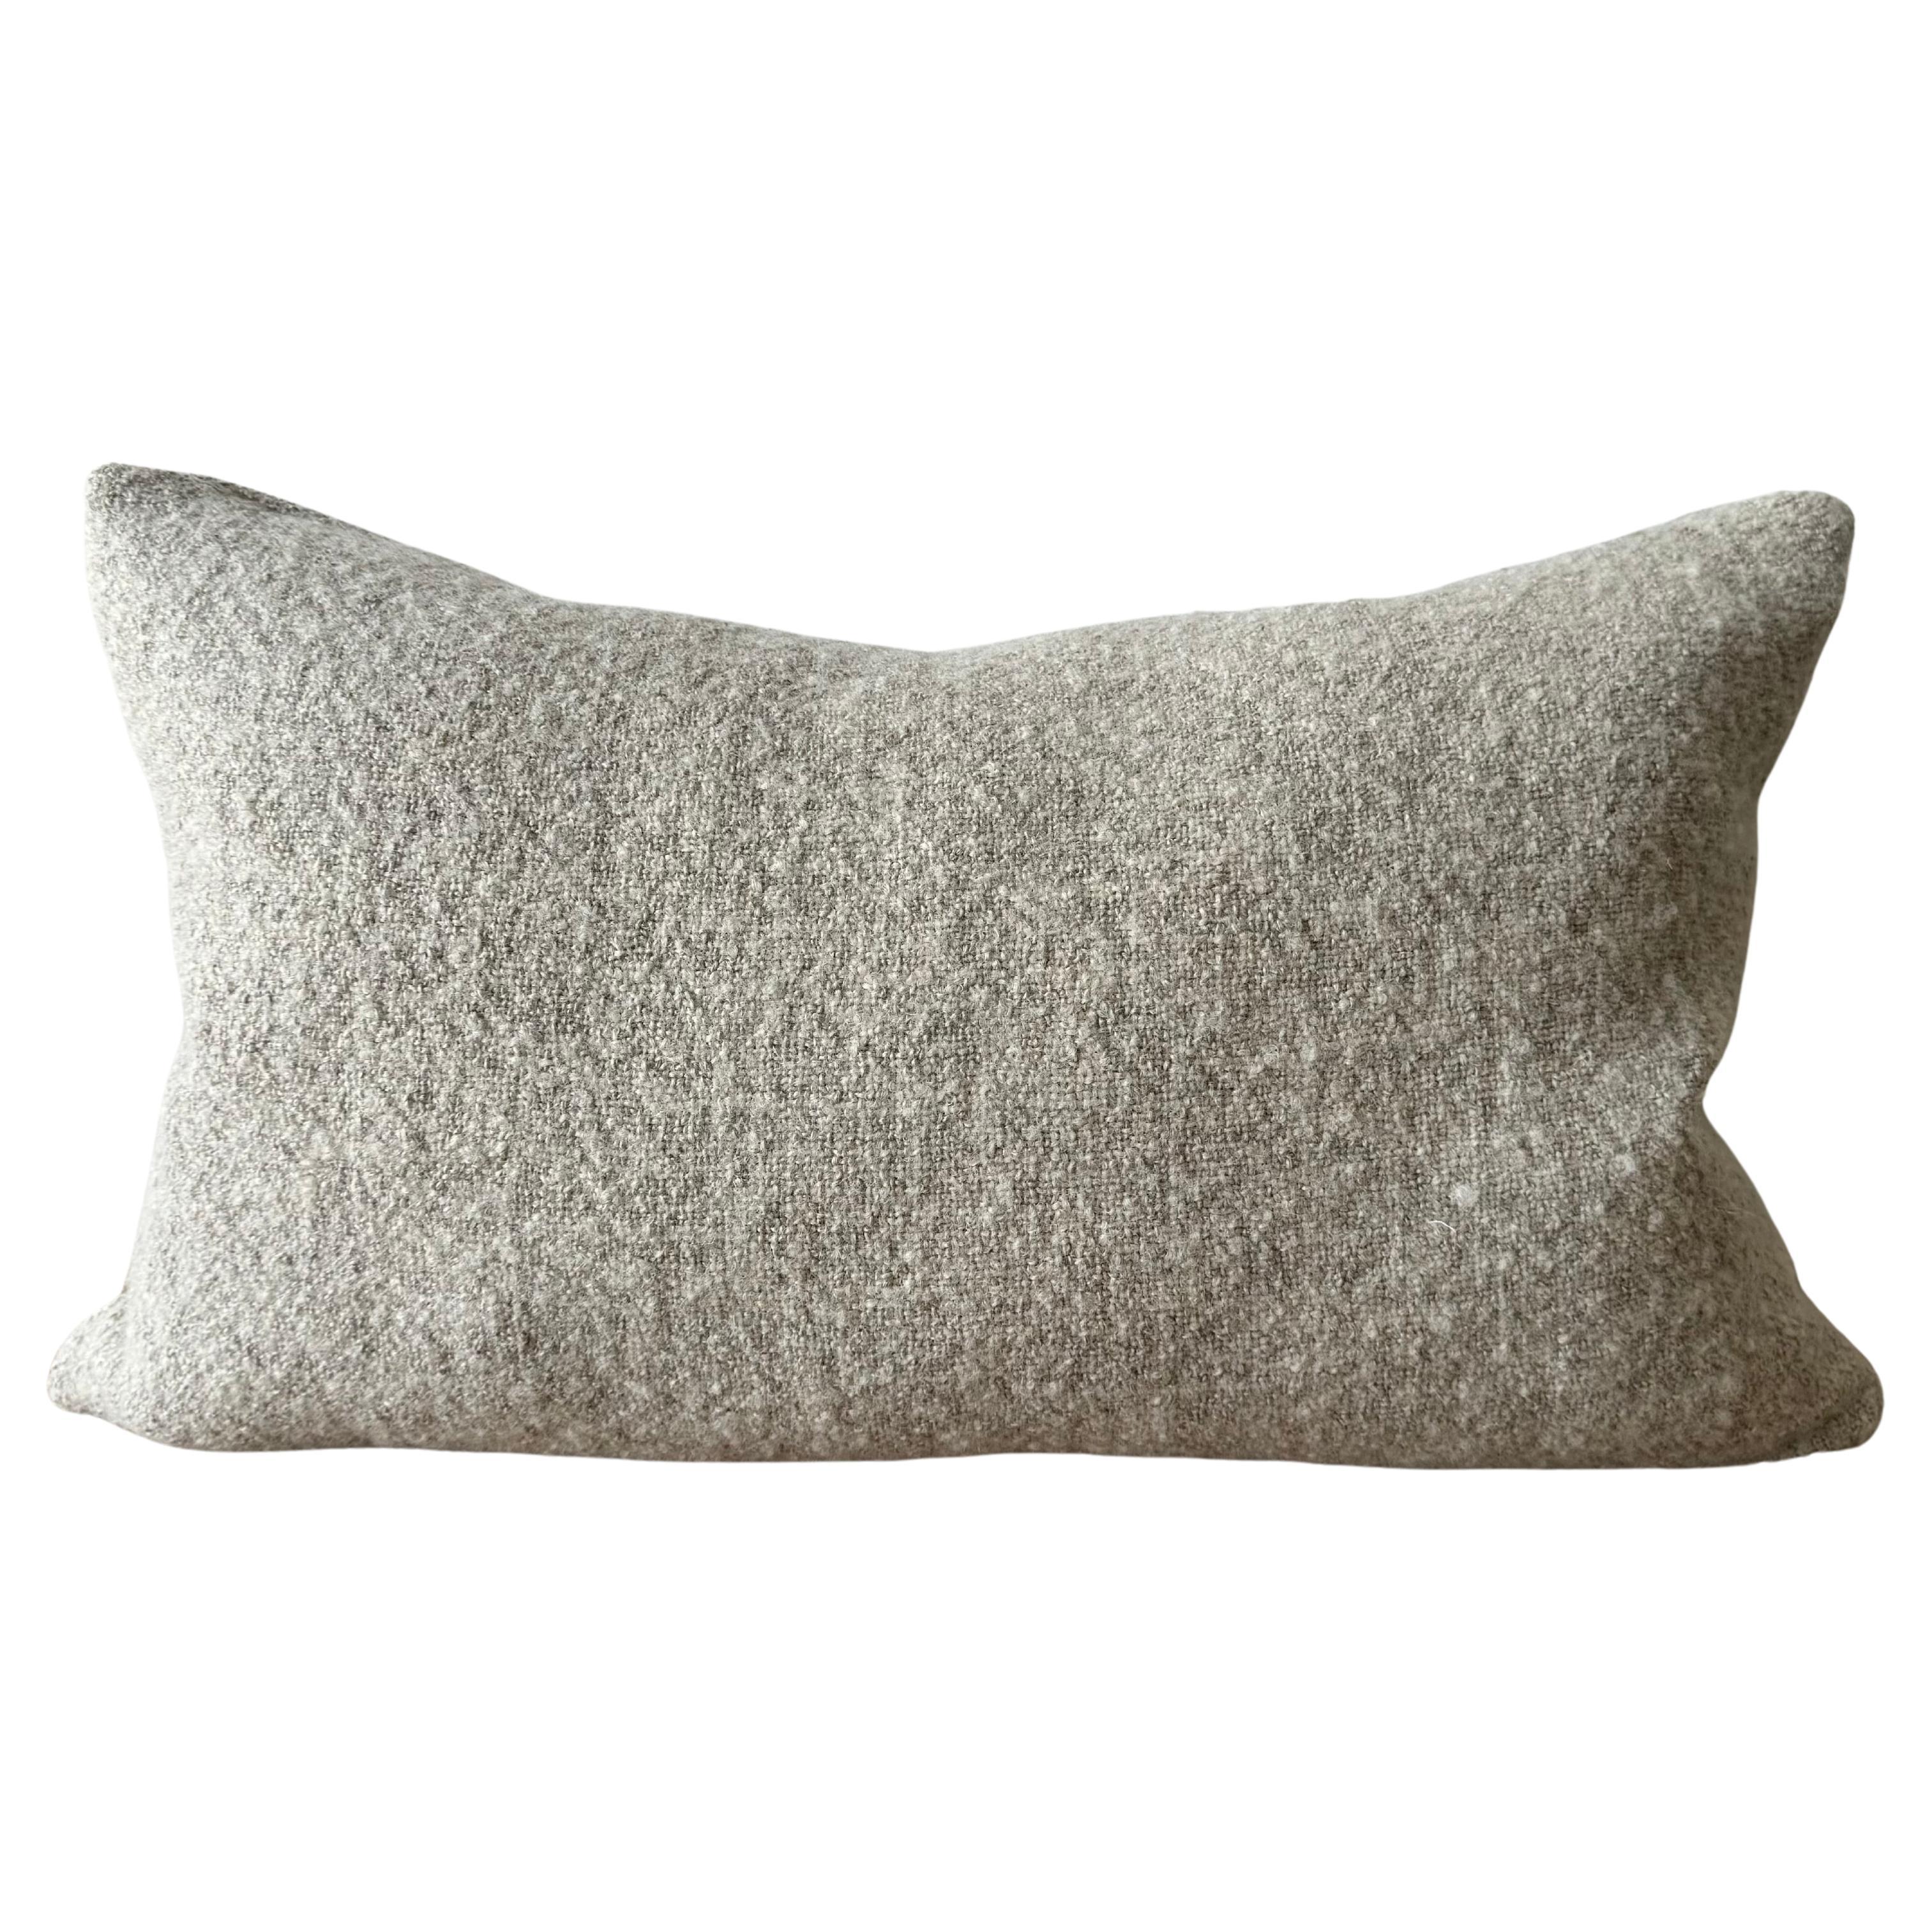 Custom Linen and Wool Lumbar Pillow in Flax with Down Feather Insert